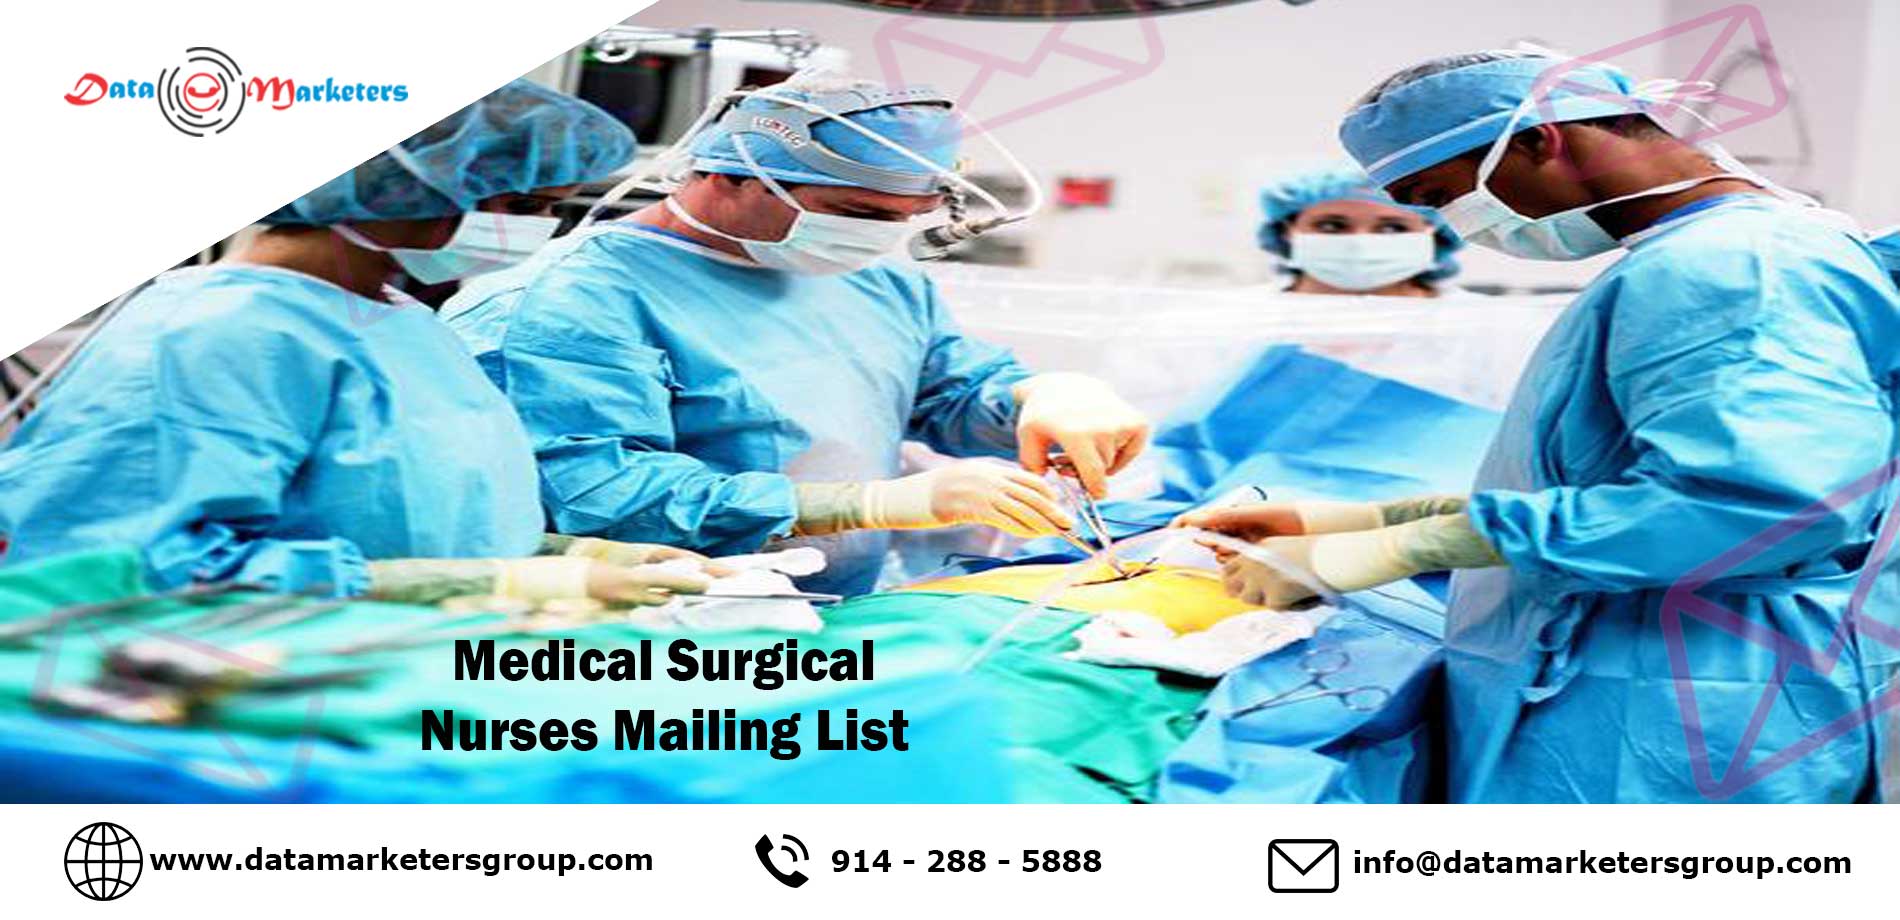 Medical Surgical Nurses Email List | Data Marketers Group